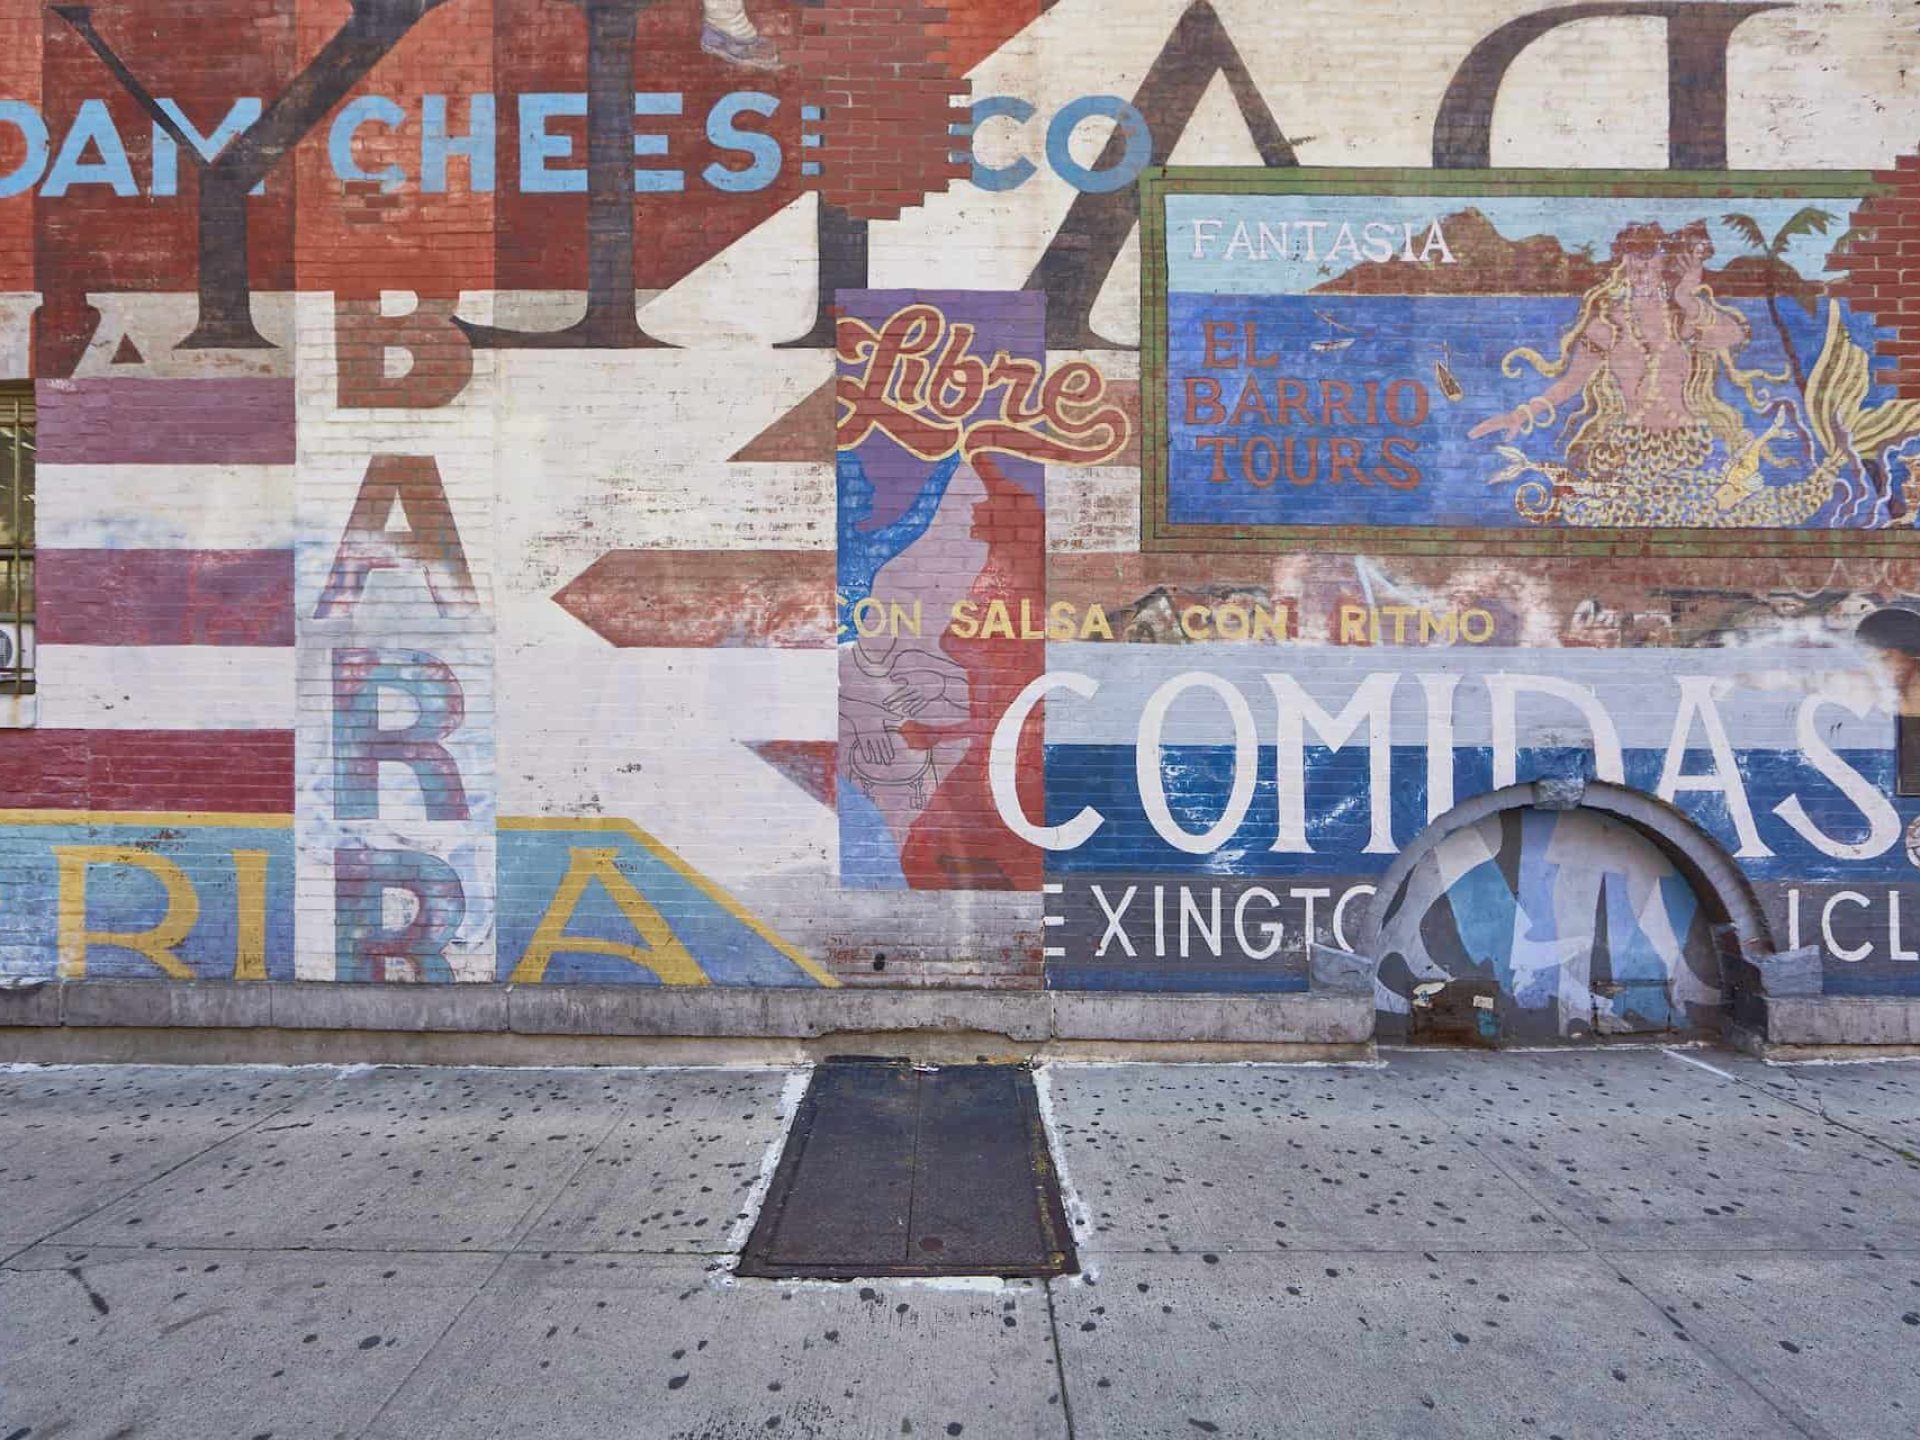 Brick wall in East Harlem, New York with street art containing business names, national flags, and Spanish words.